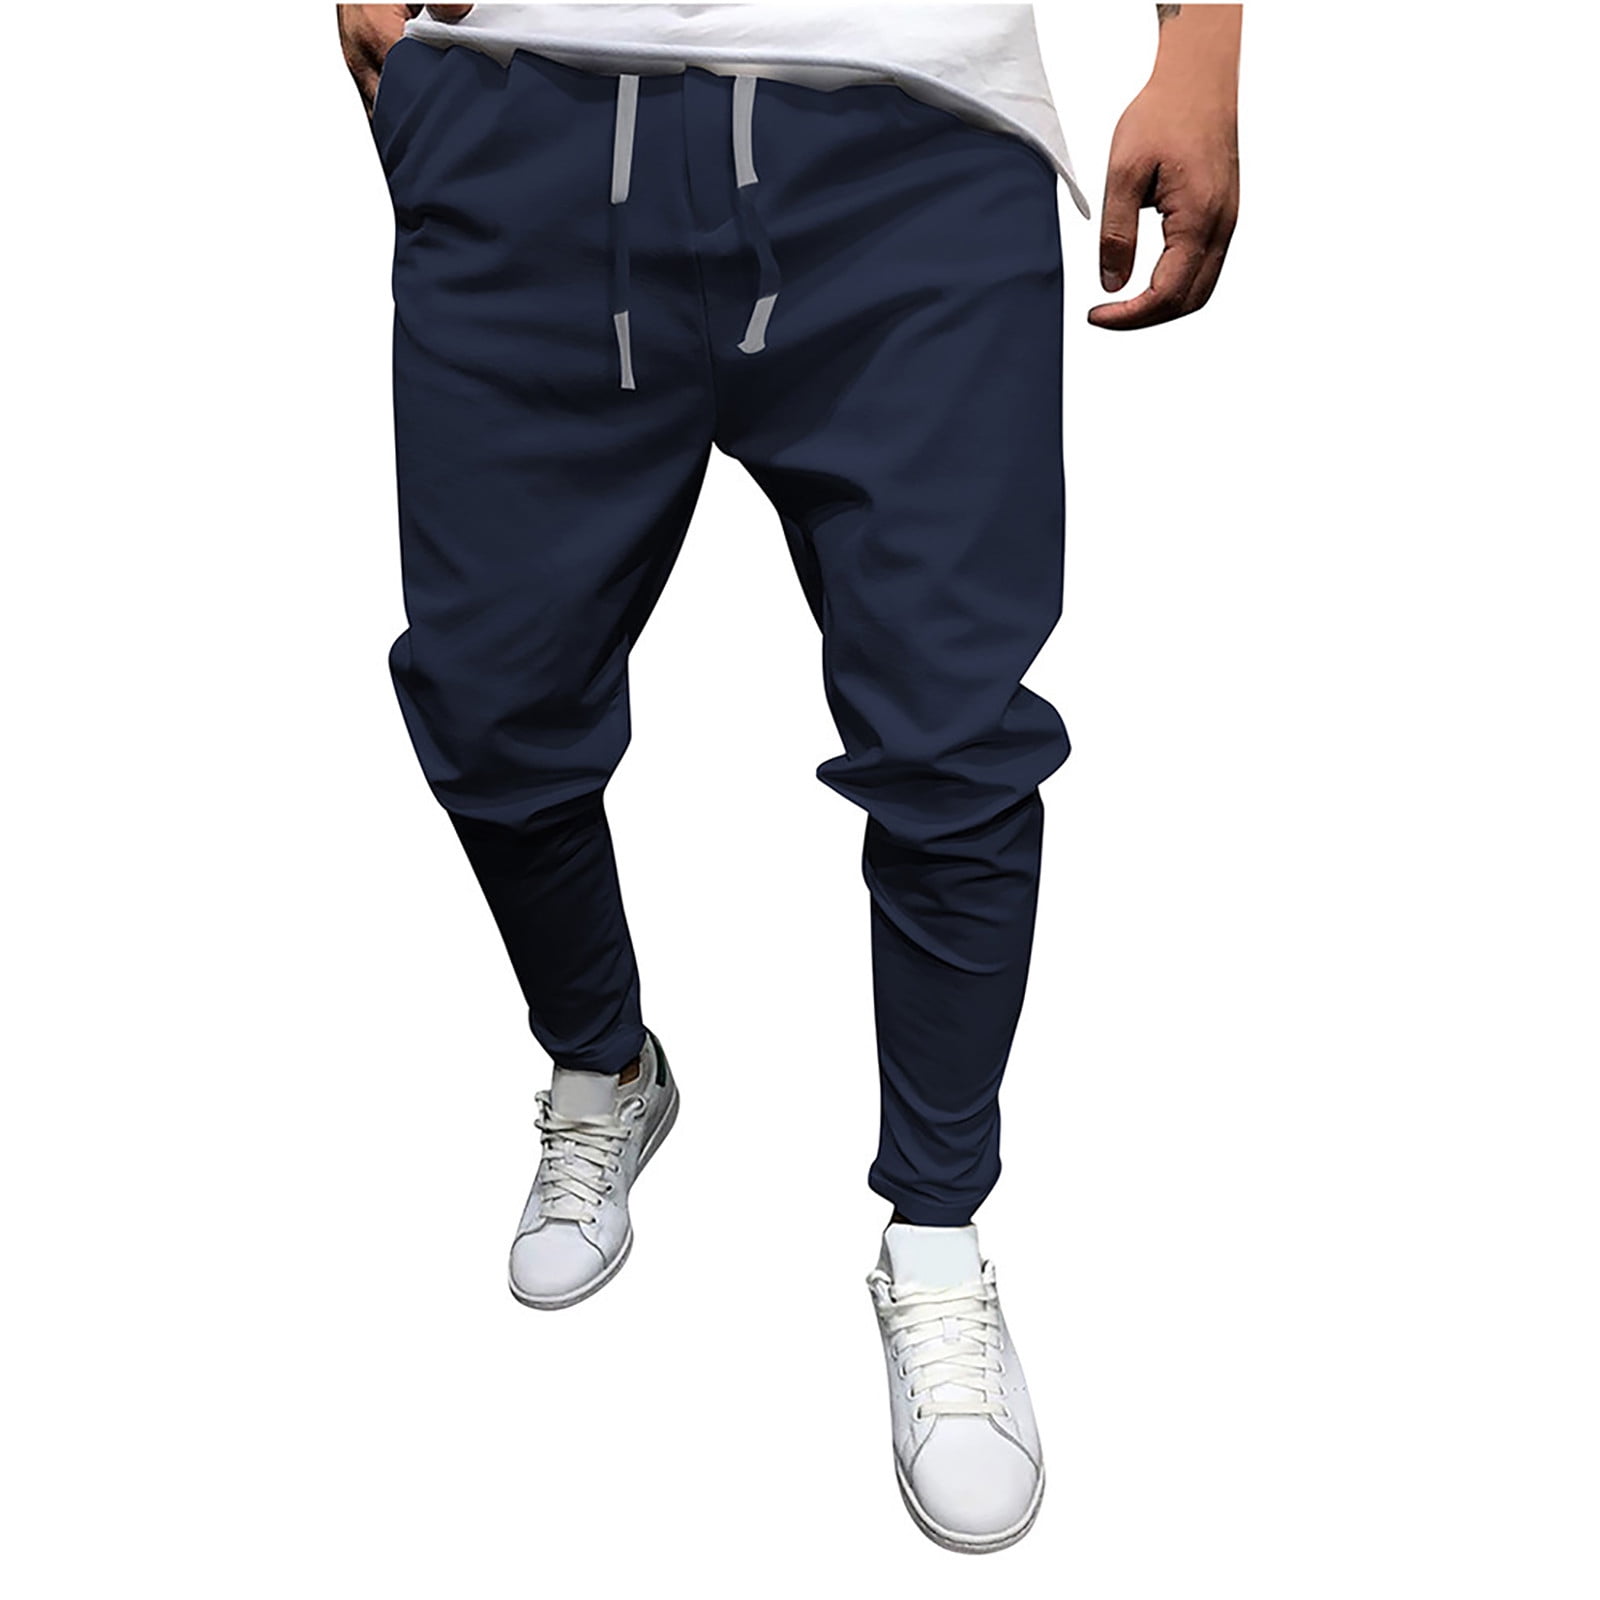 Fpqtro Mens Sweatpants Fruit Of The Loom Plus Size Clearance Under 10 ...